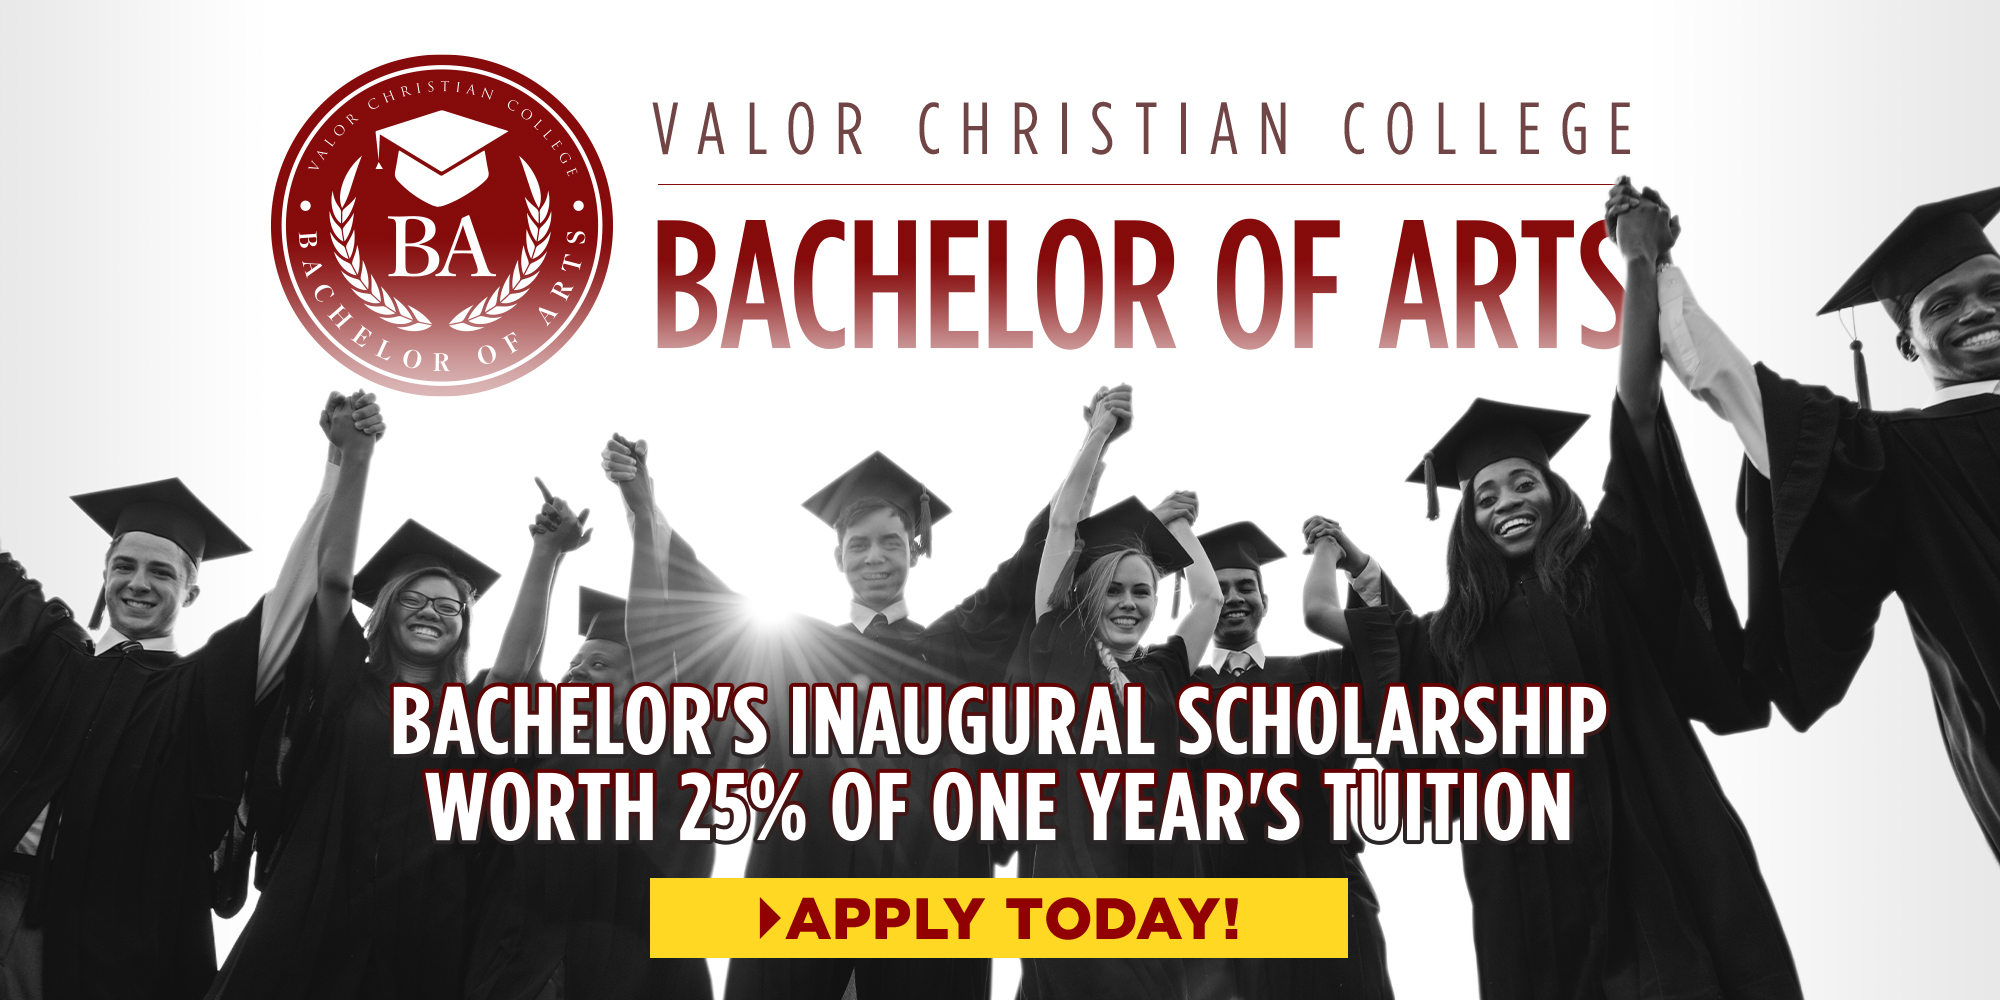 Valor Christian College Bachelor of Arts Opportunities Apply Today